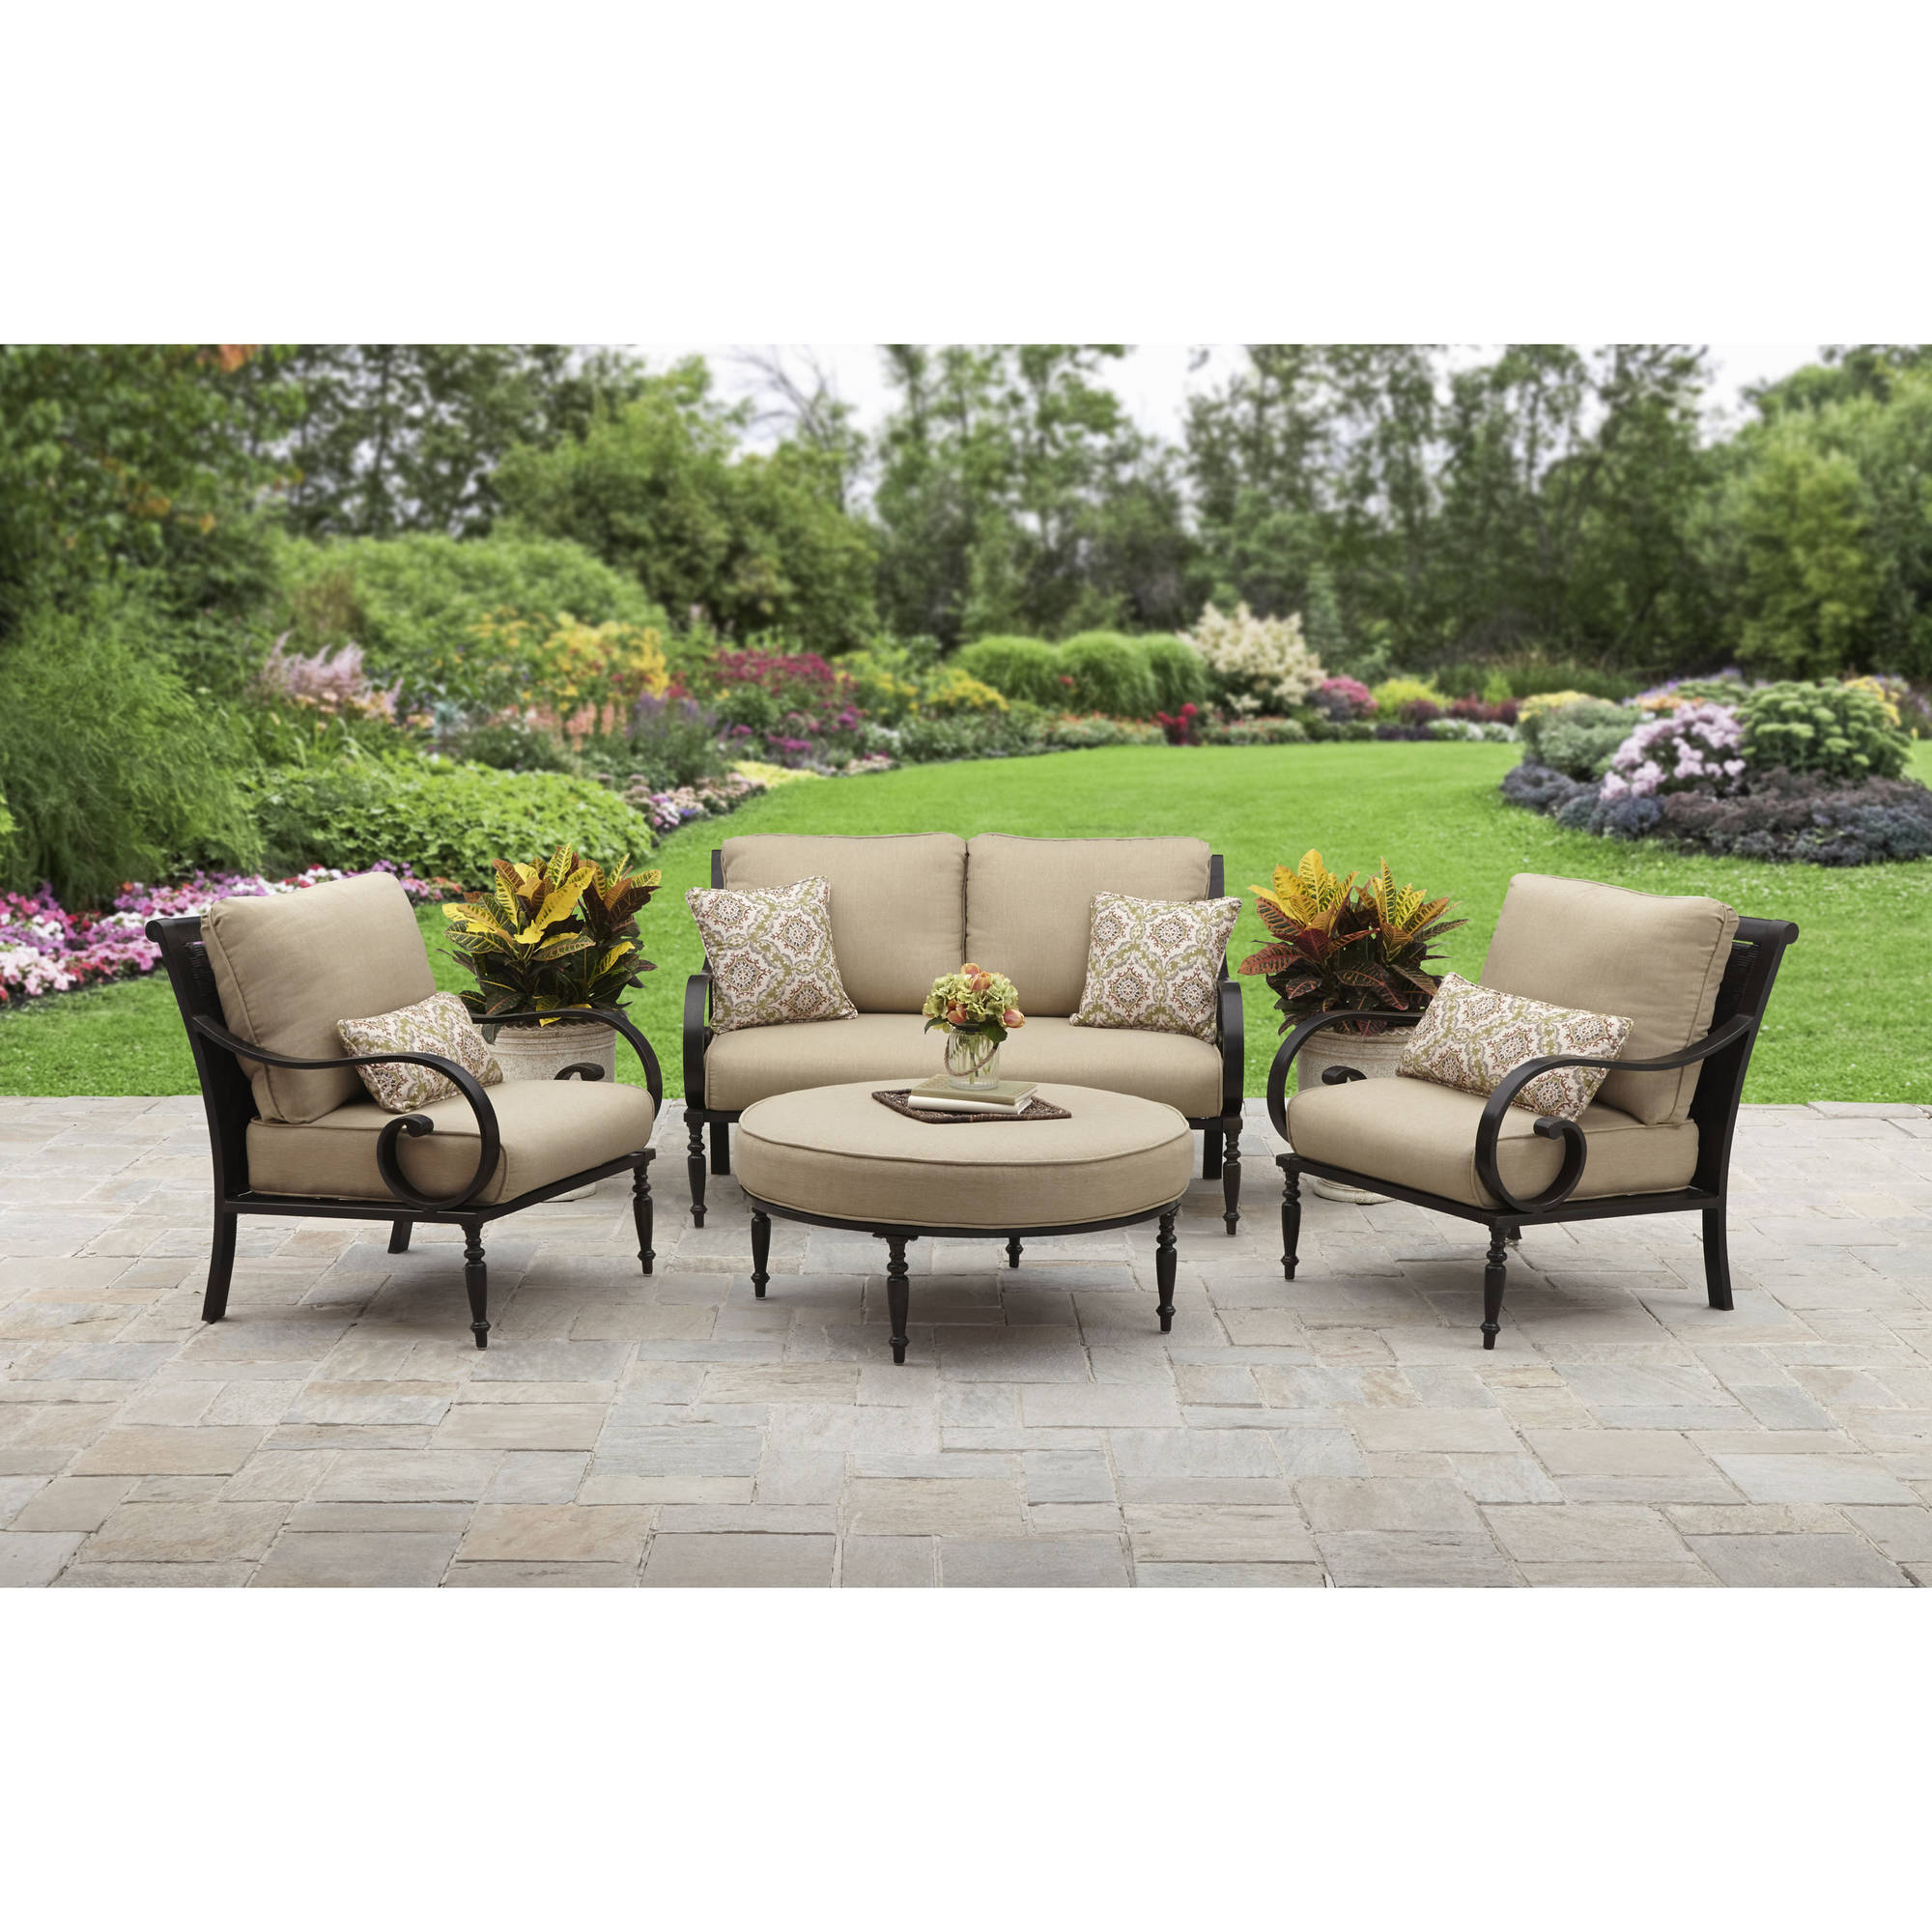 patio furniture better homes and gardens englewood heights ii aluminum 4-piece outdoor patio DFXELOS